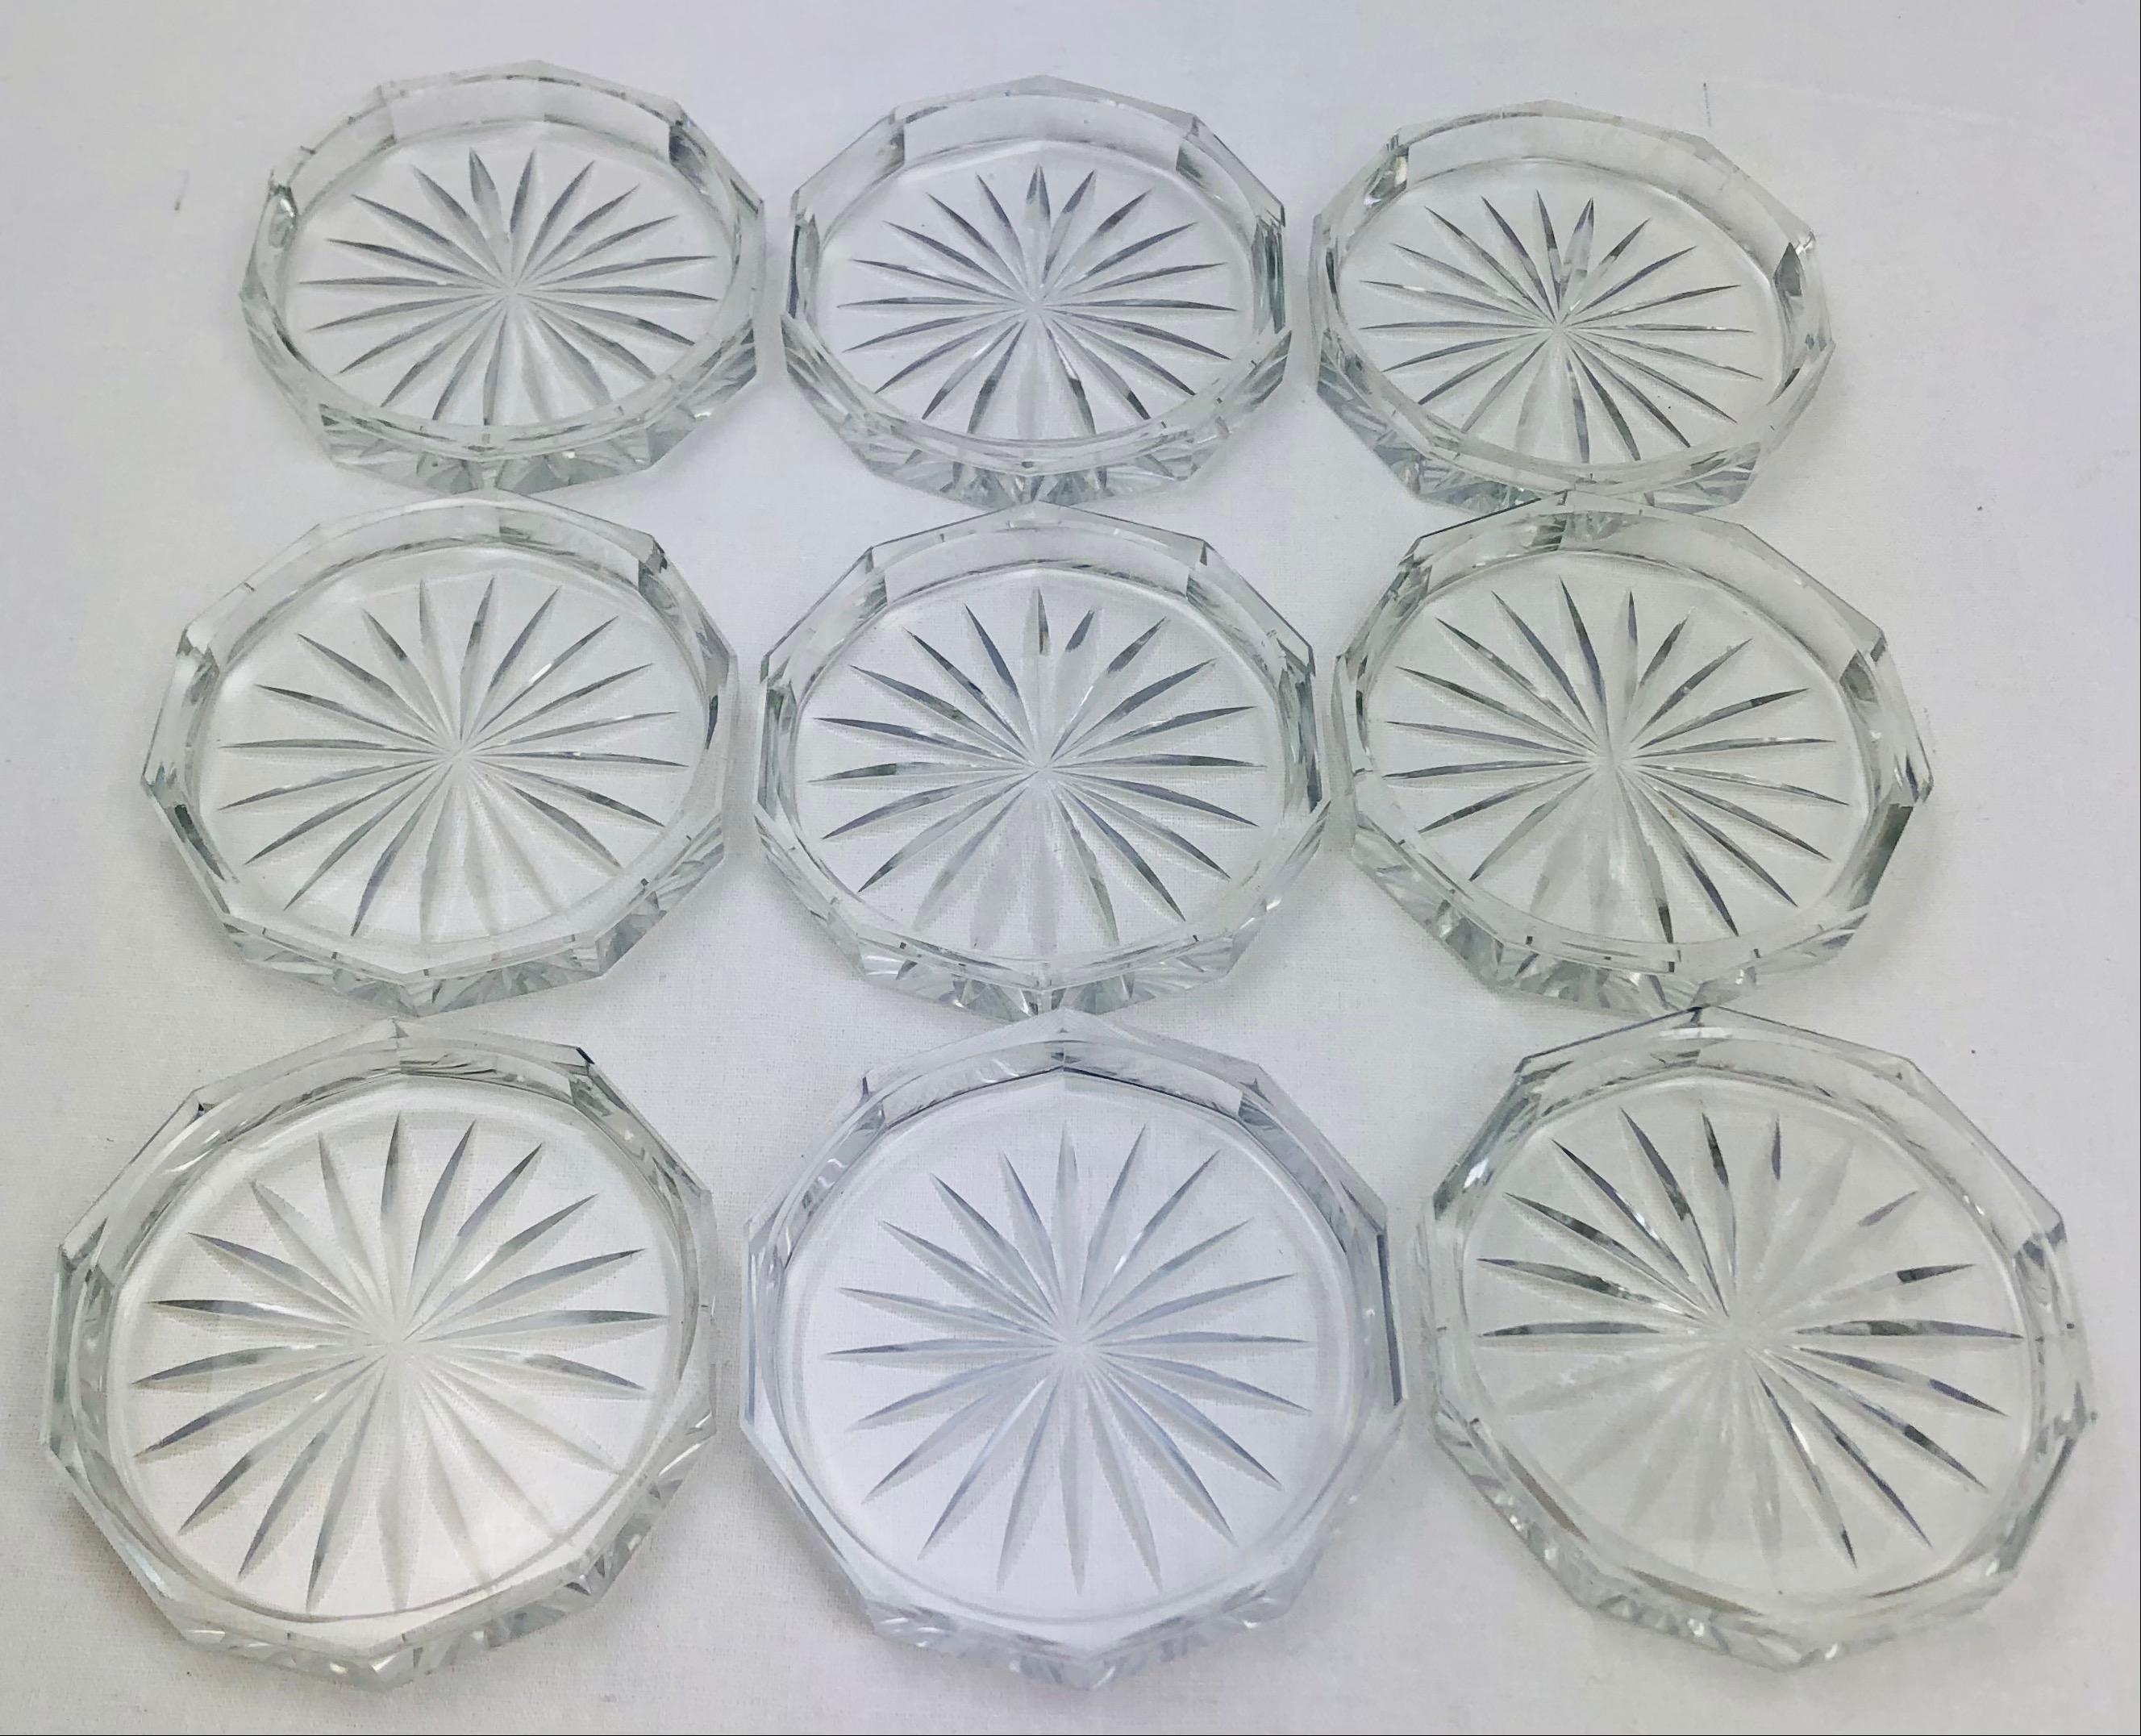 Set of 9 Crystal Wine or Champagne Flute Coasters Attributed to Baccarat 1